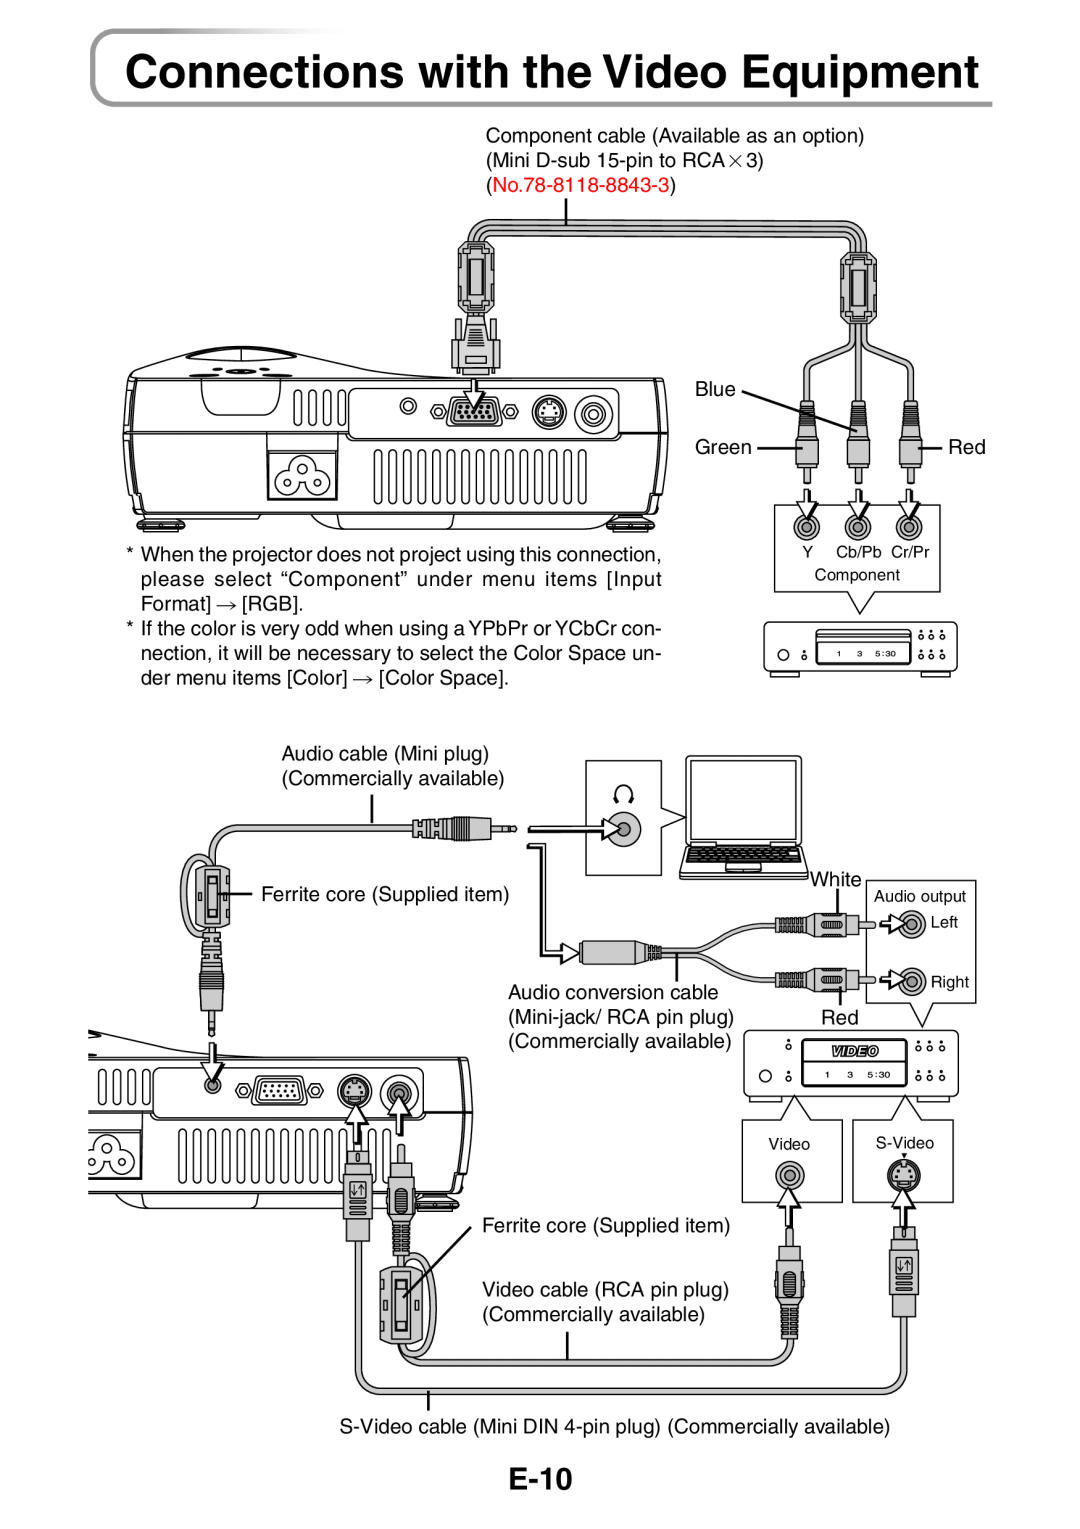 3M PX5 user manual Connections with the Video Equipment, E-10 